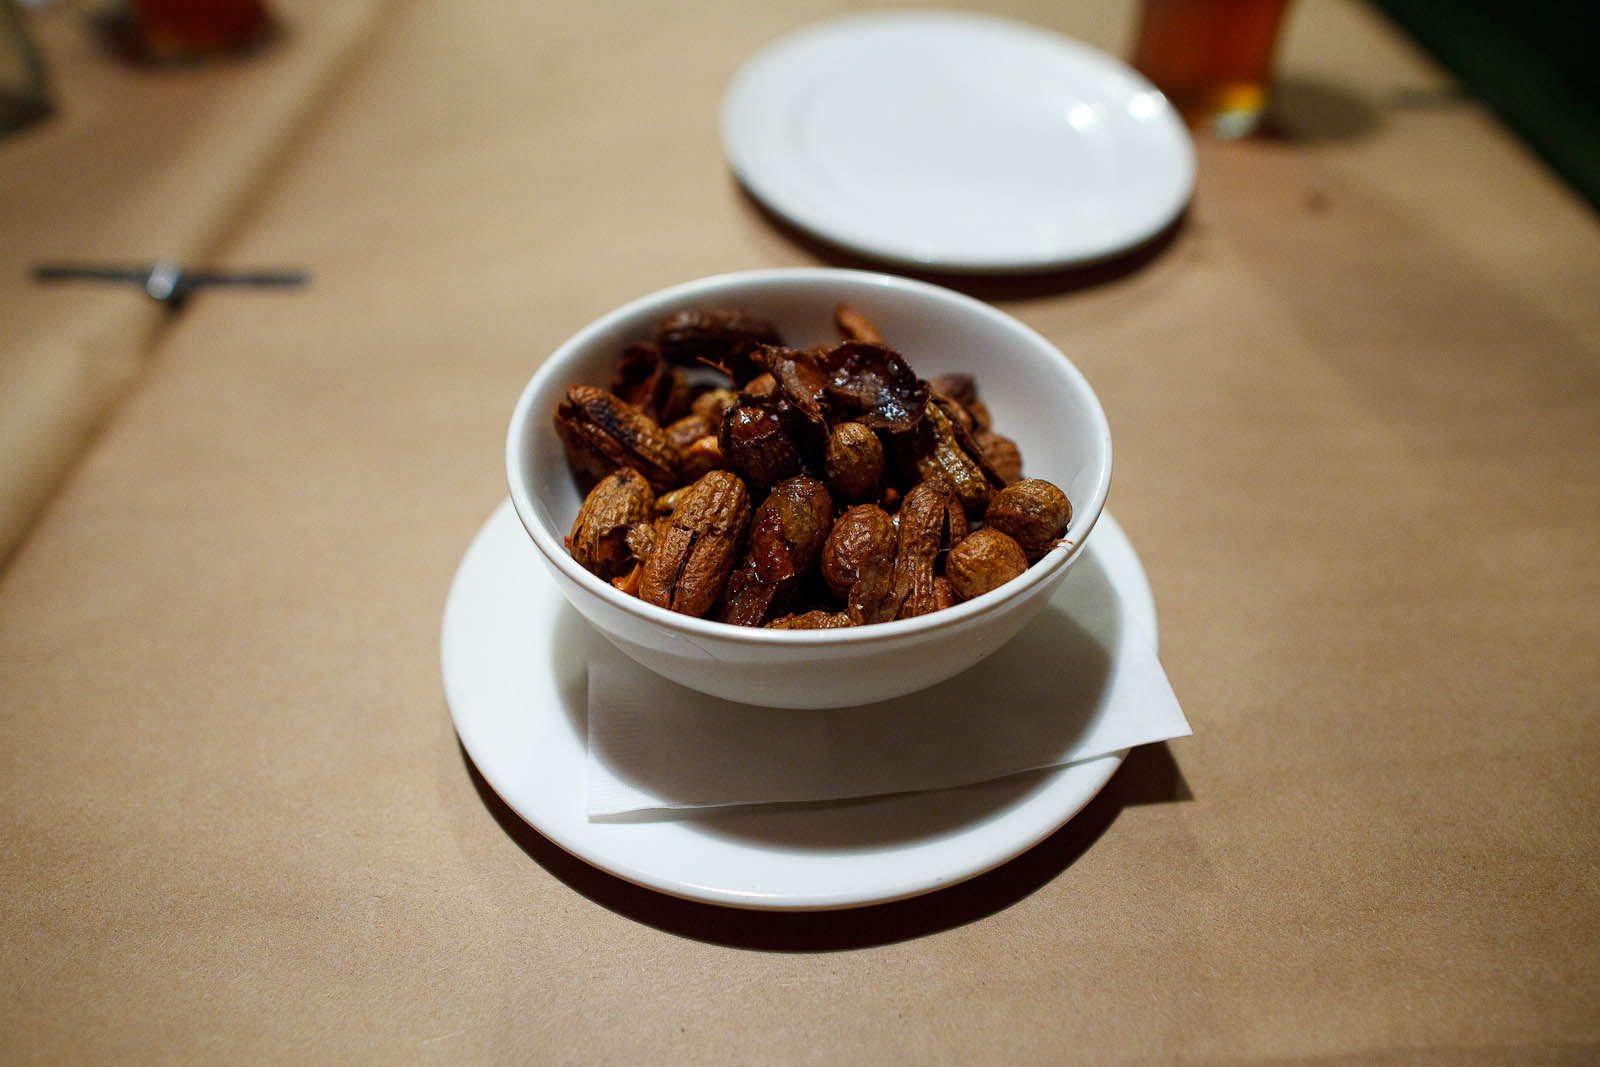 Boiled peanuts cooked in pork fat ($6)